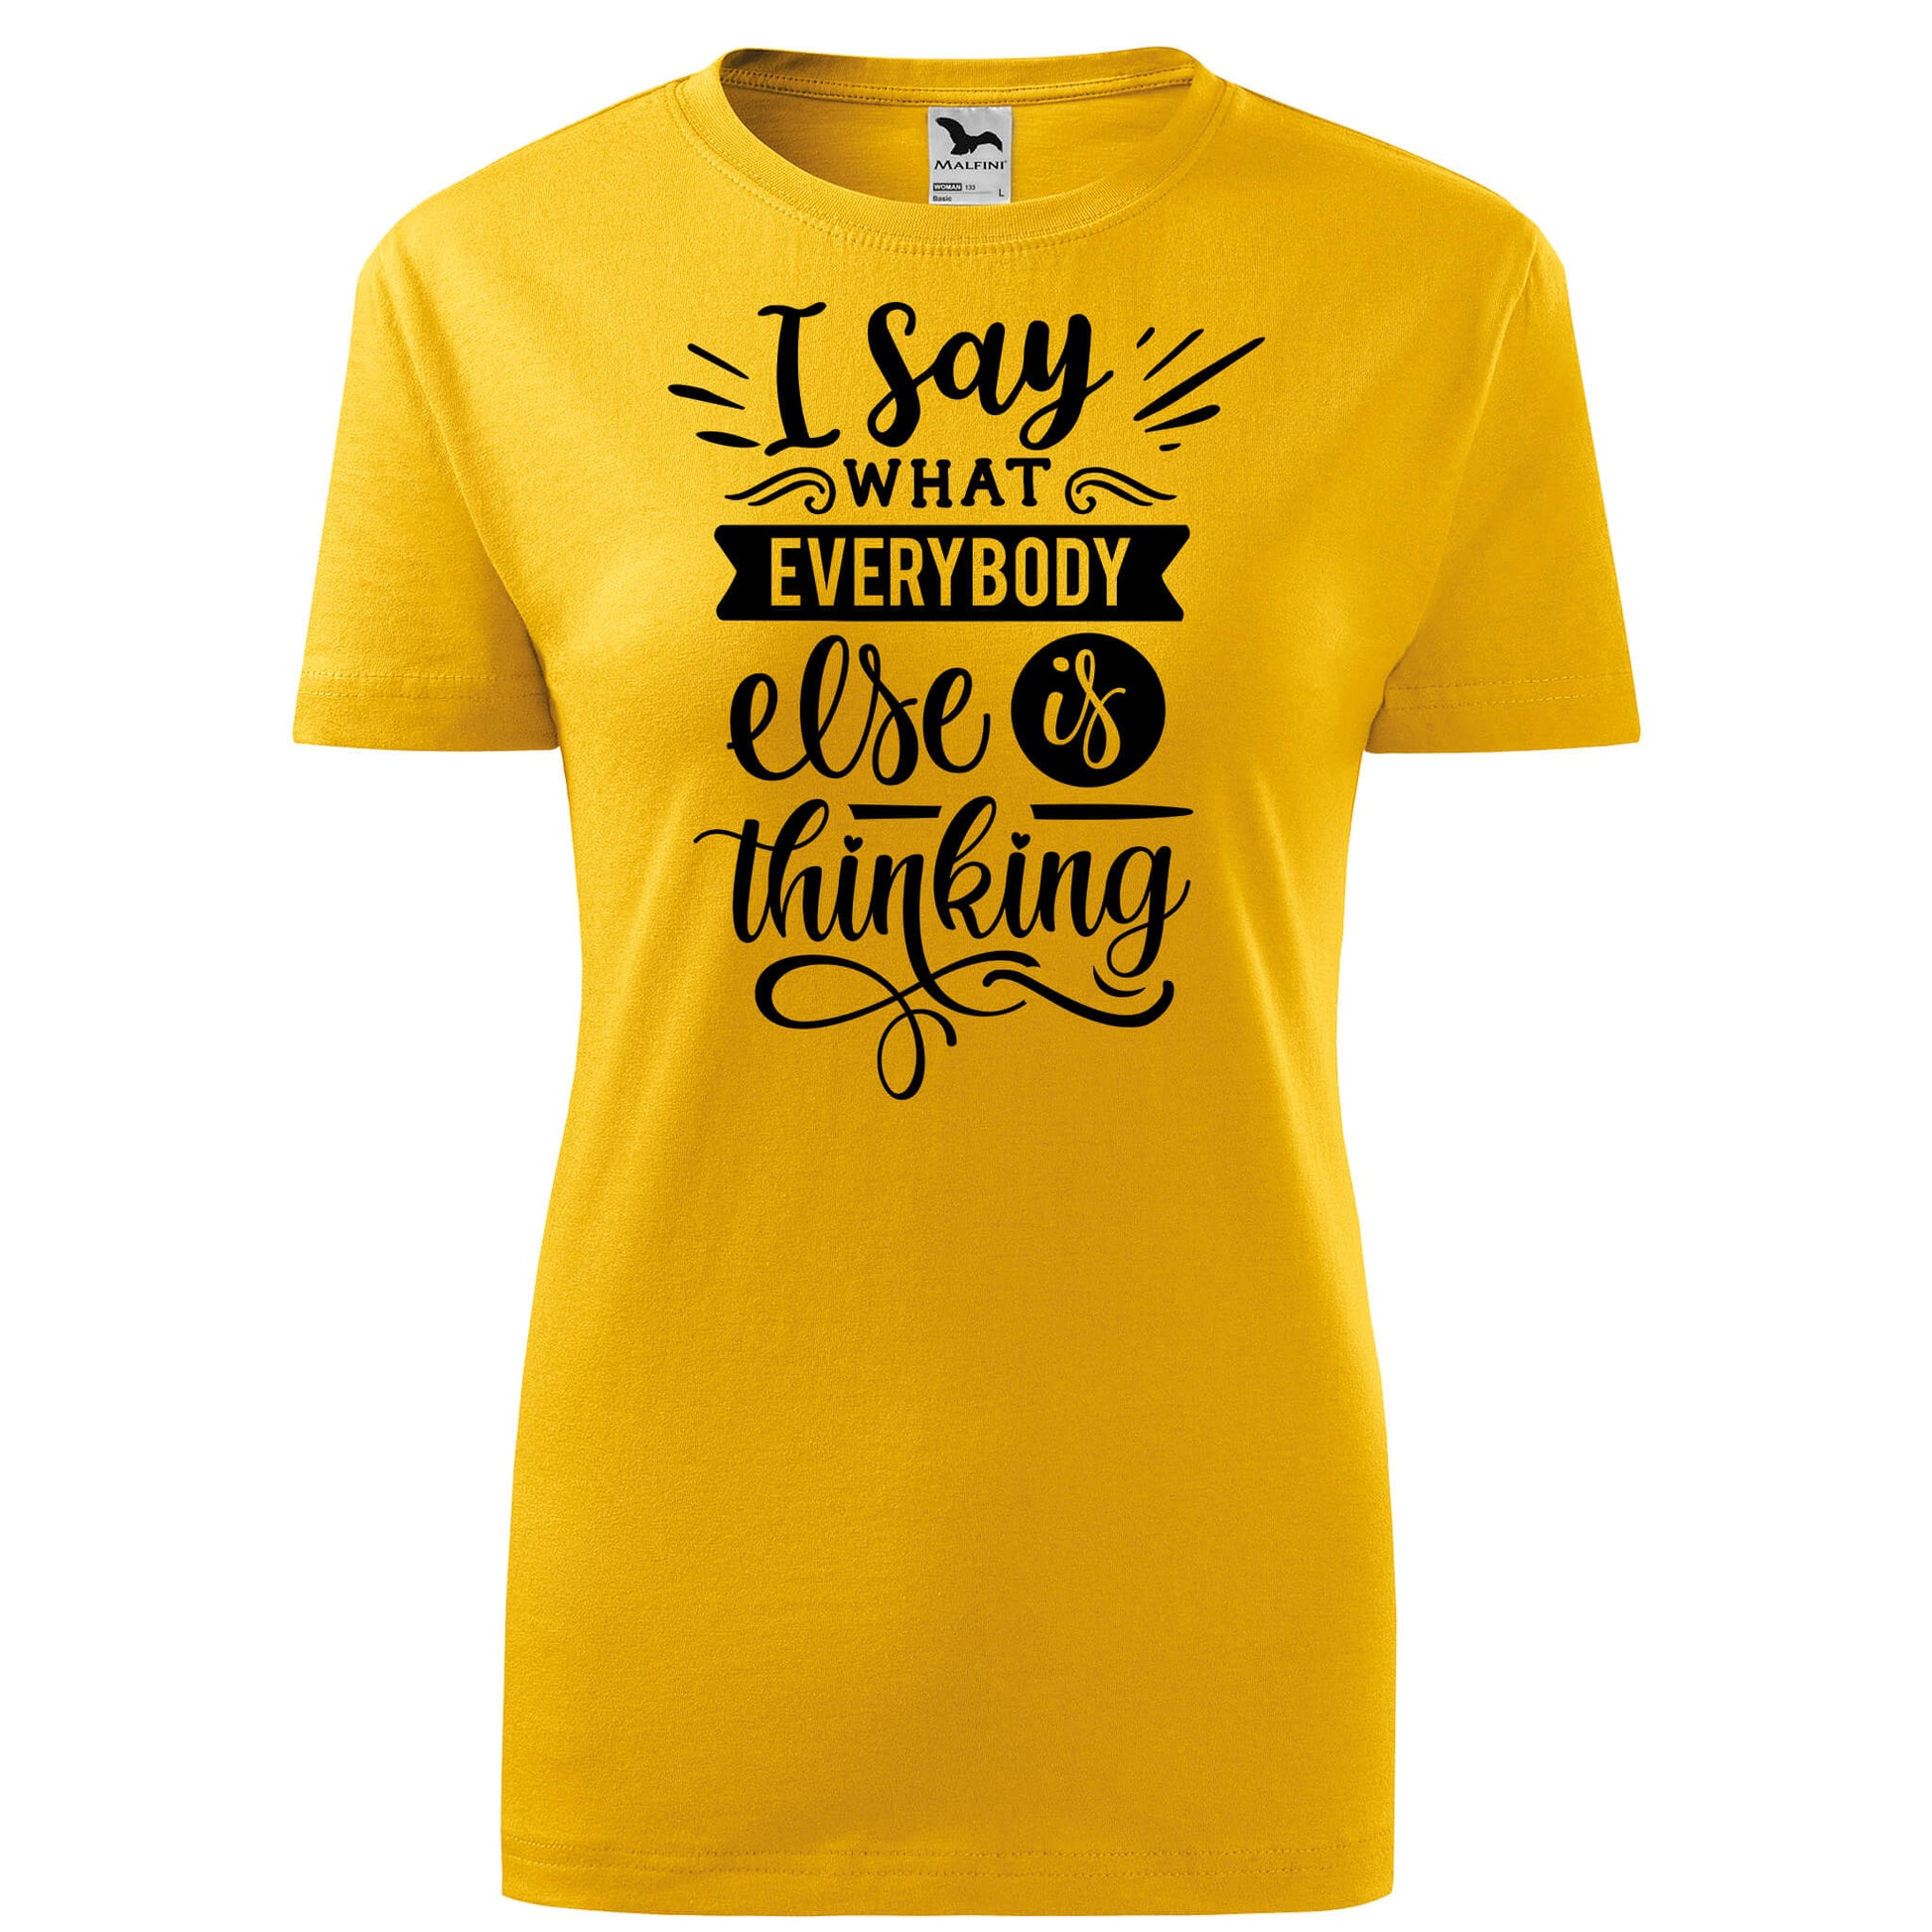 I say what everybody is thinking t-shirt - rvdesignprint